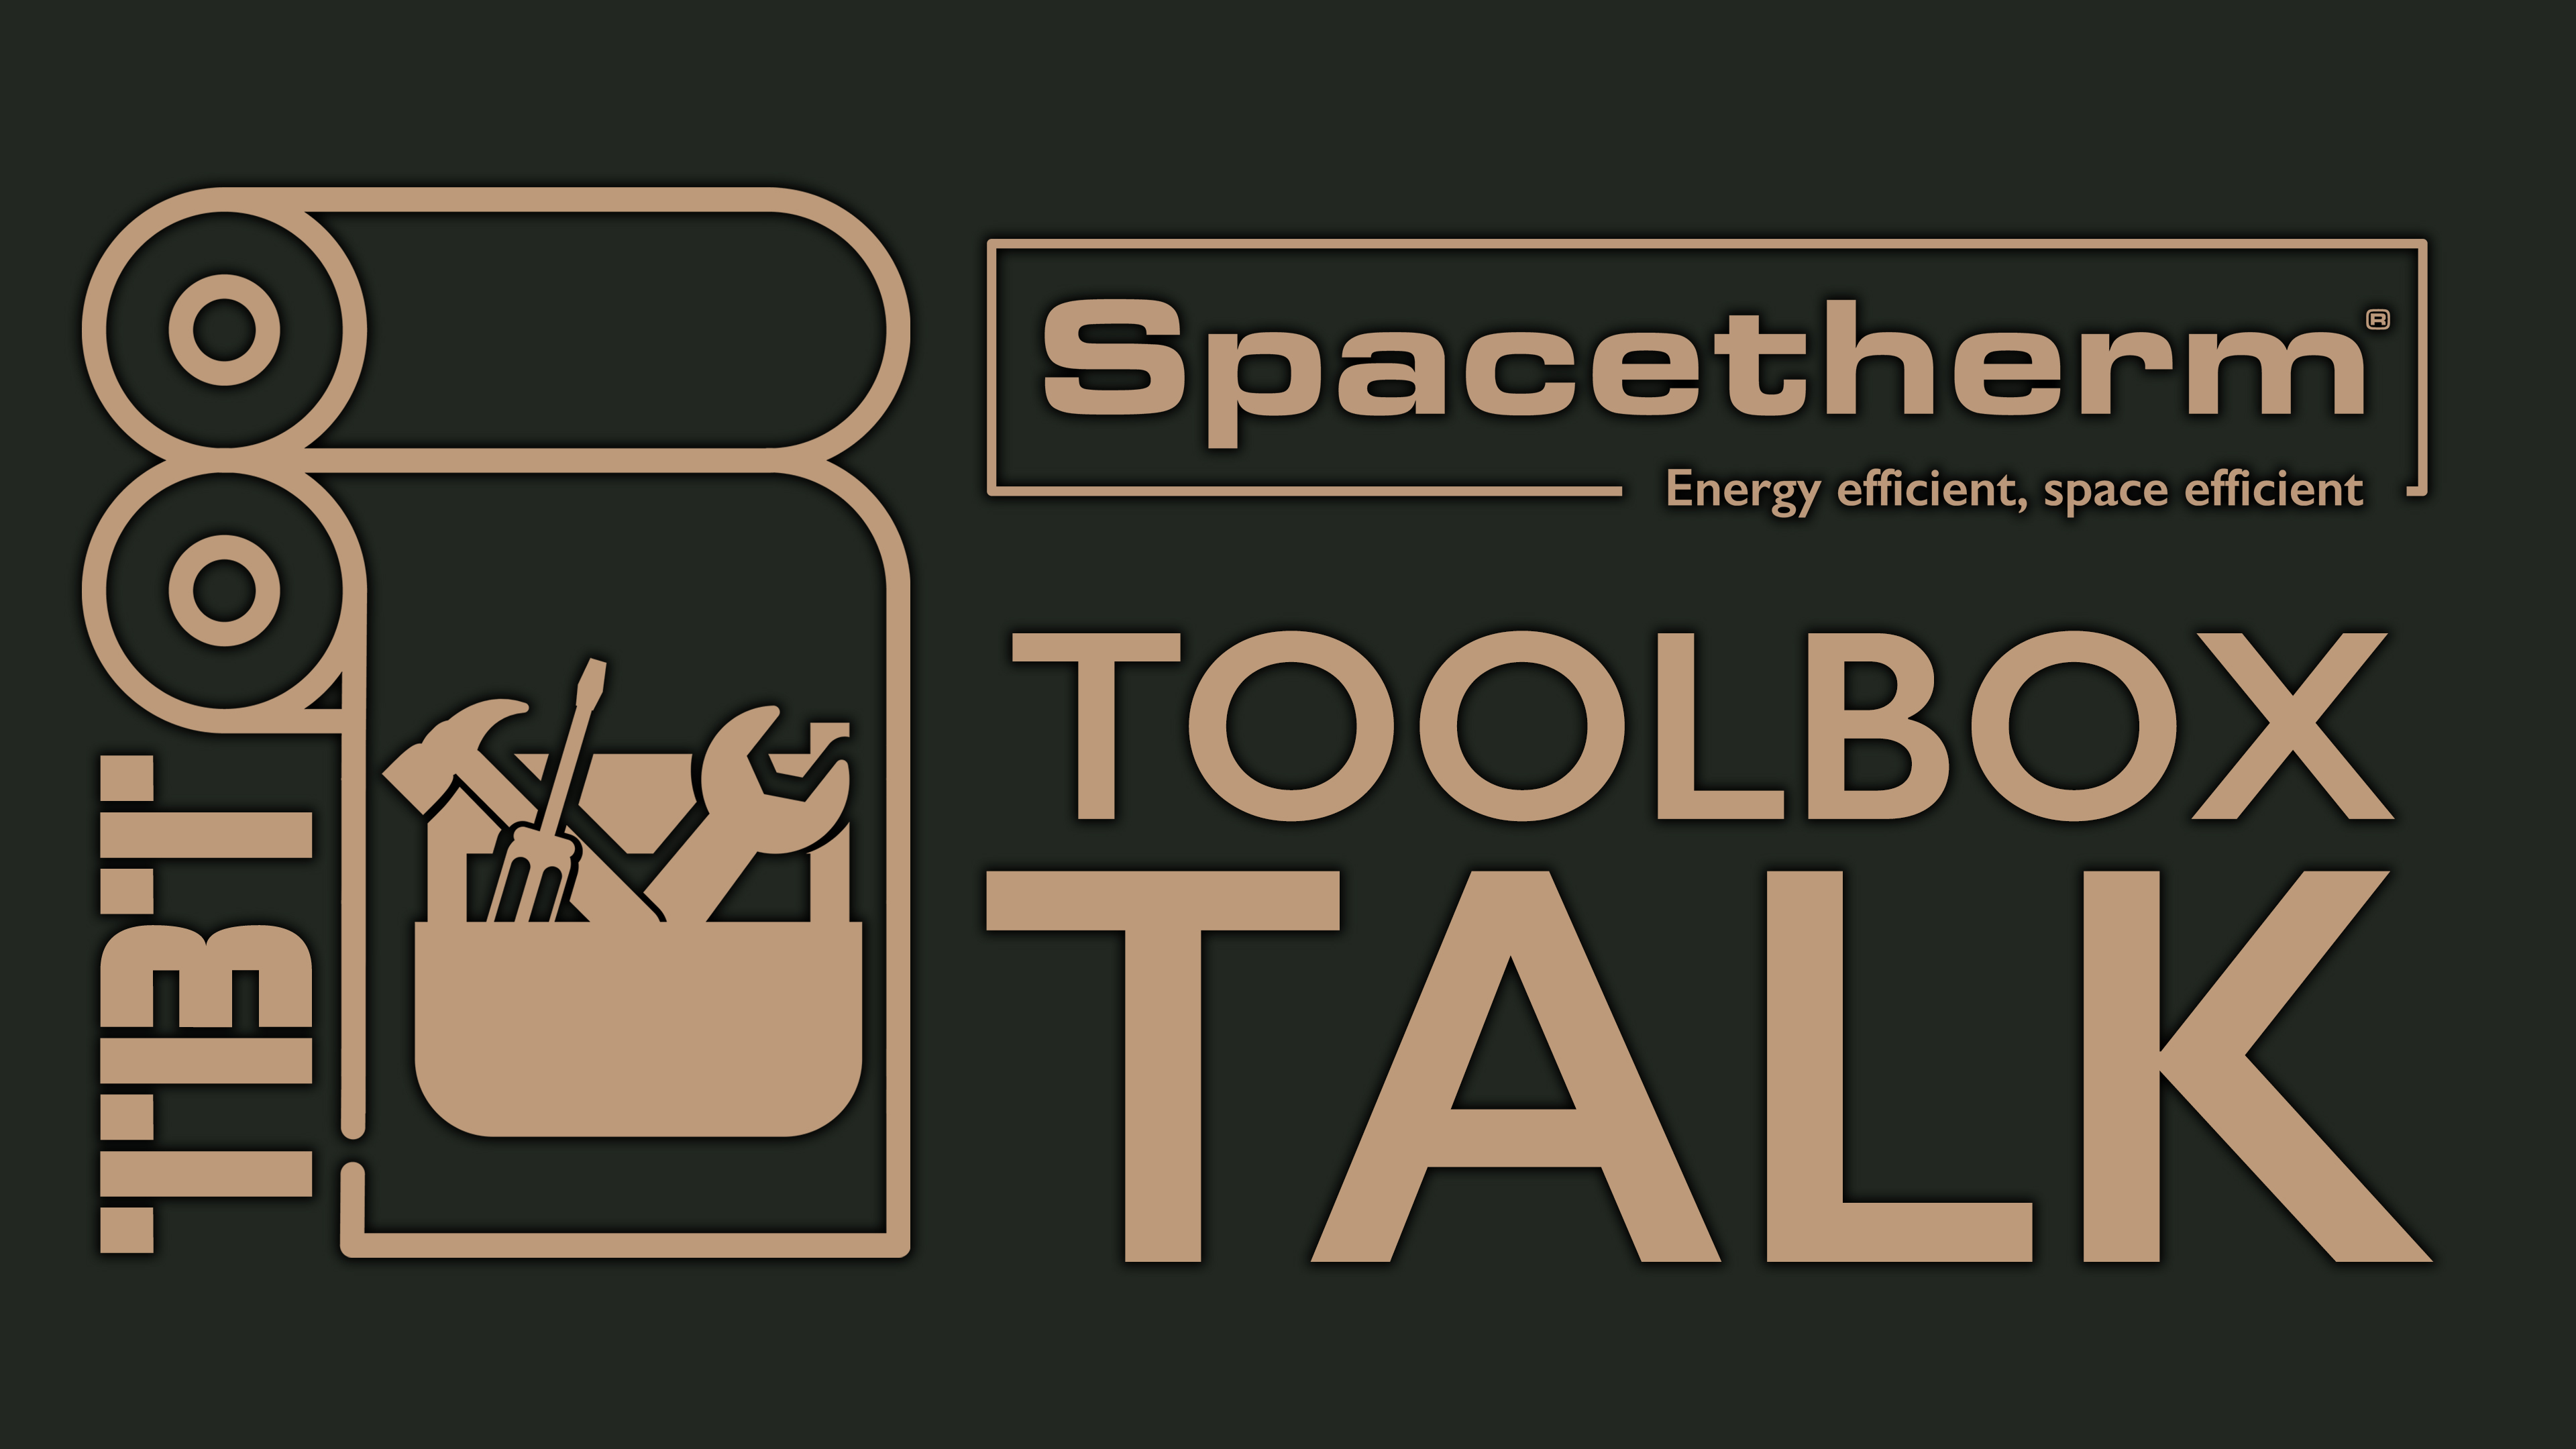 Welcome to our 30-minute webinar, "Webinar: Spacetherm Toolbox Talk". An overview of the practical application of the Spacetherm range of high performance aerogel insulation systems, their performance benefits, and best practice for site installations. The webinar is followed by a Live Zoom Q&A session with our panel of technical experts.